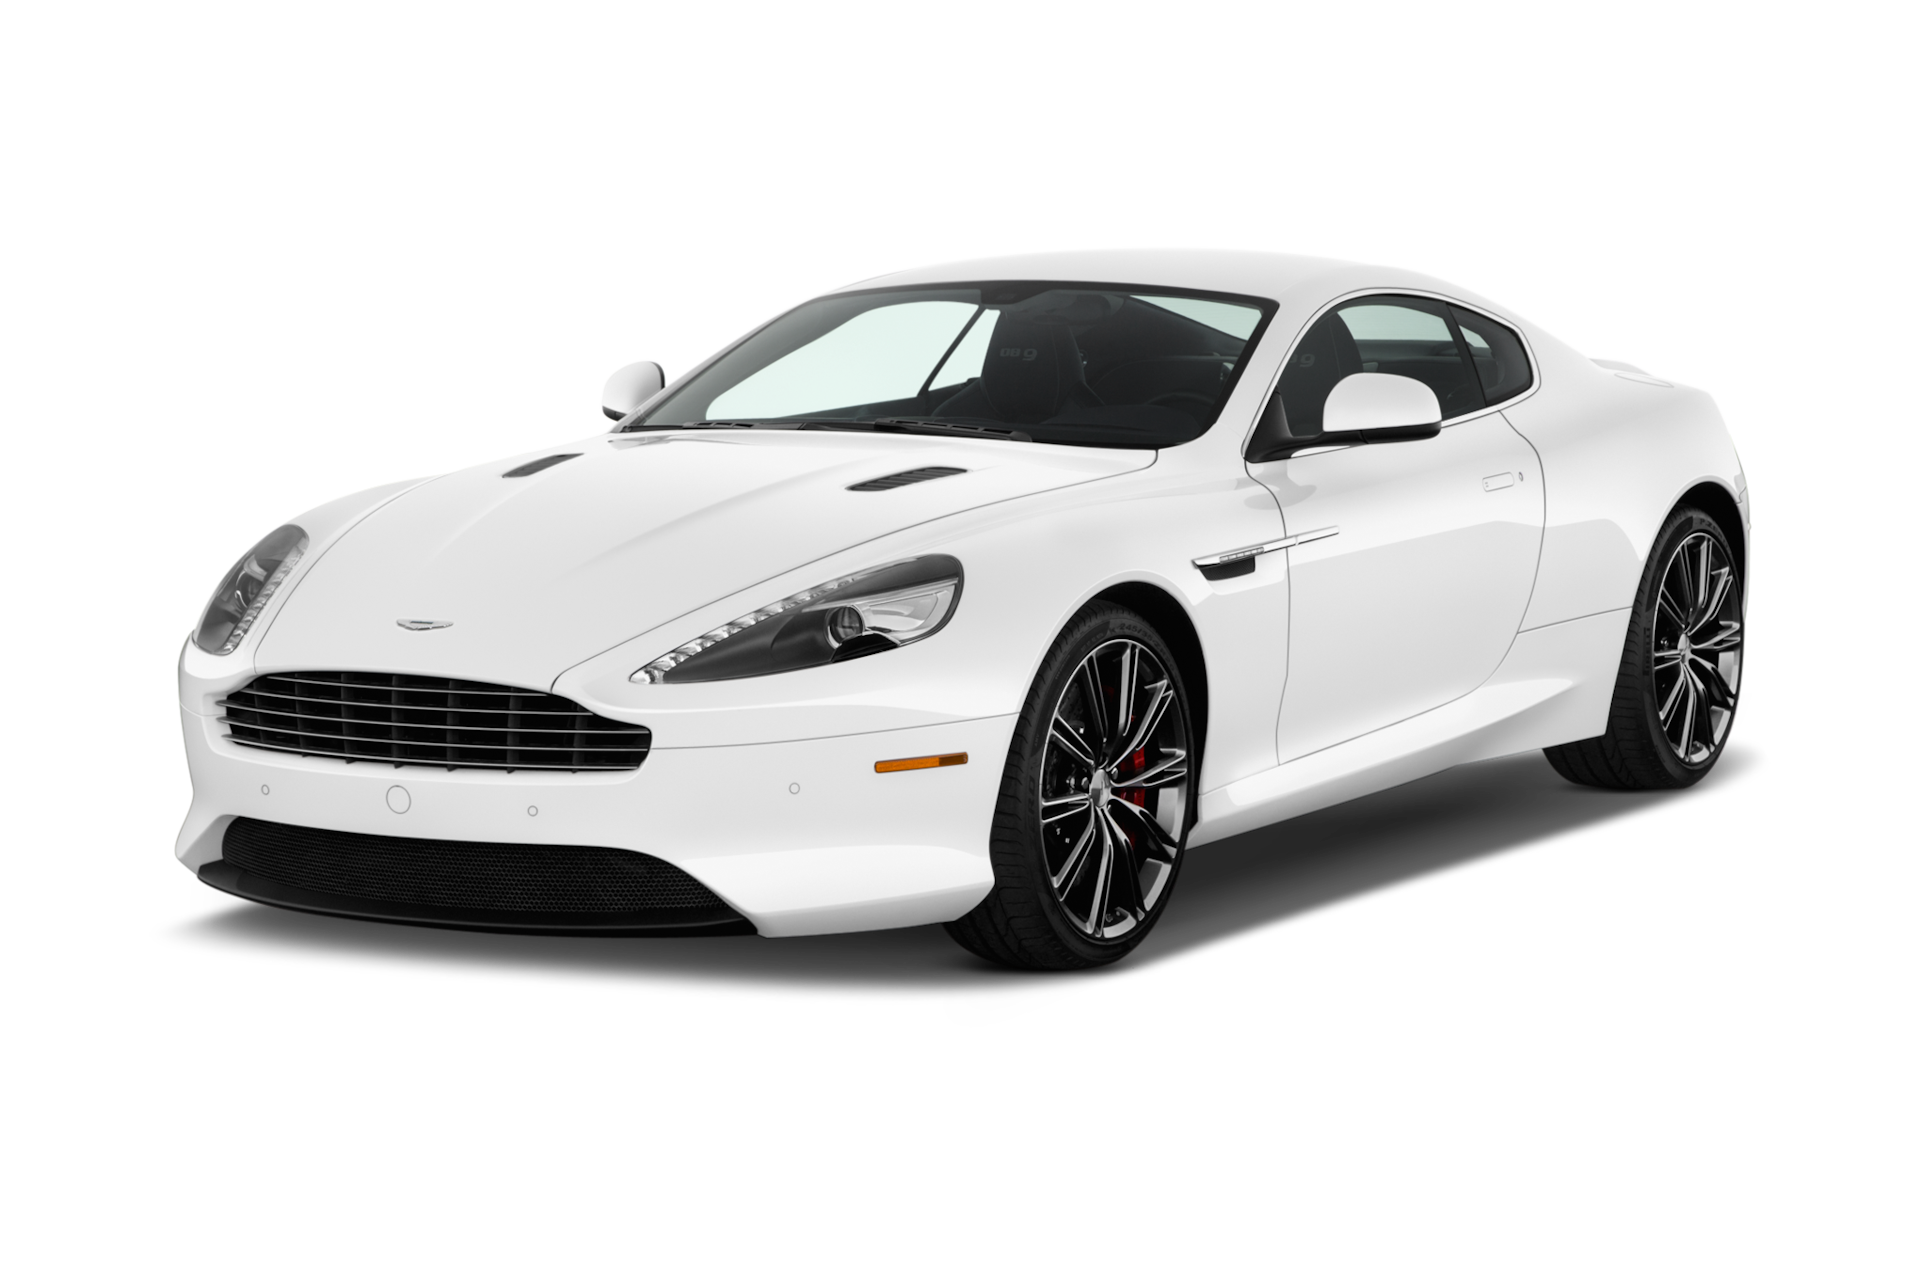 2015 Aston Martin DB9 Prices, Reviews, and Photos - MotorTrend